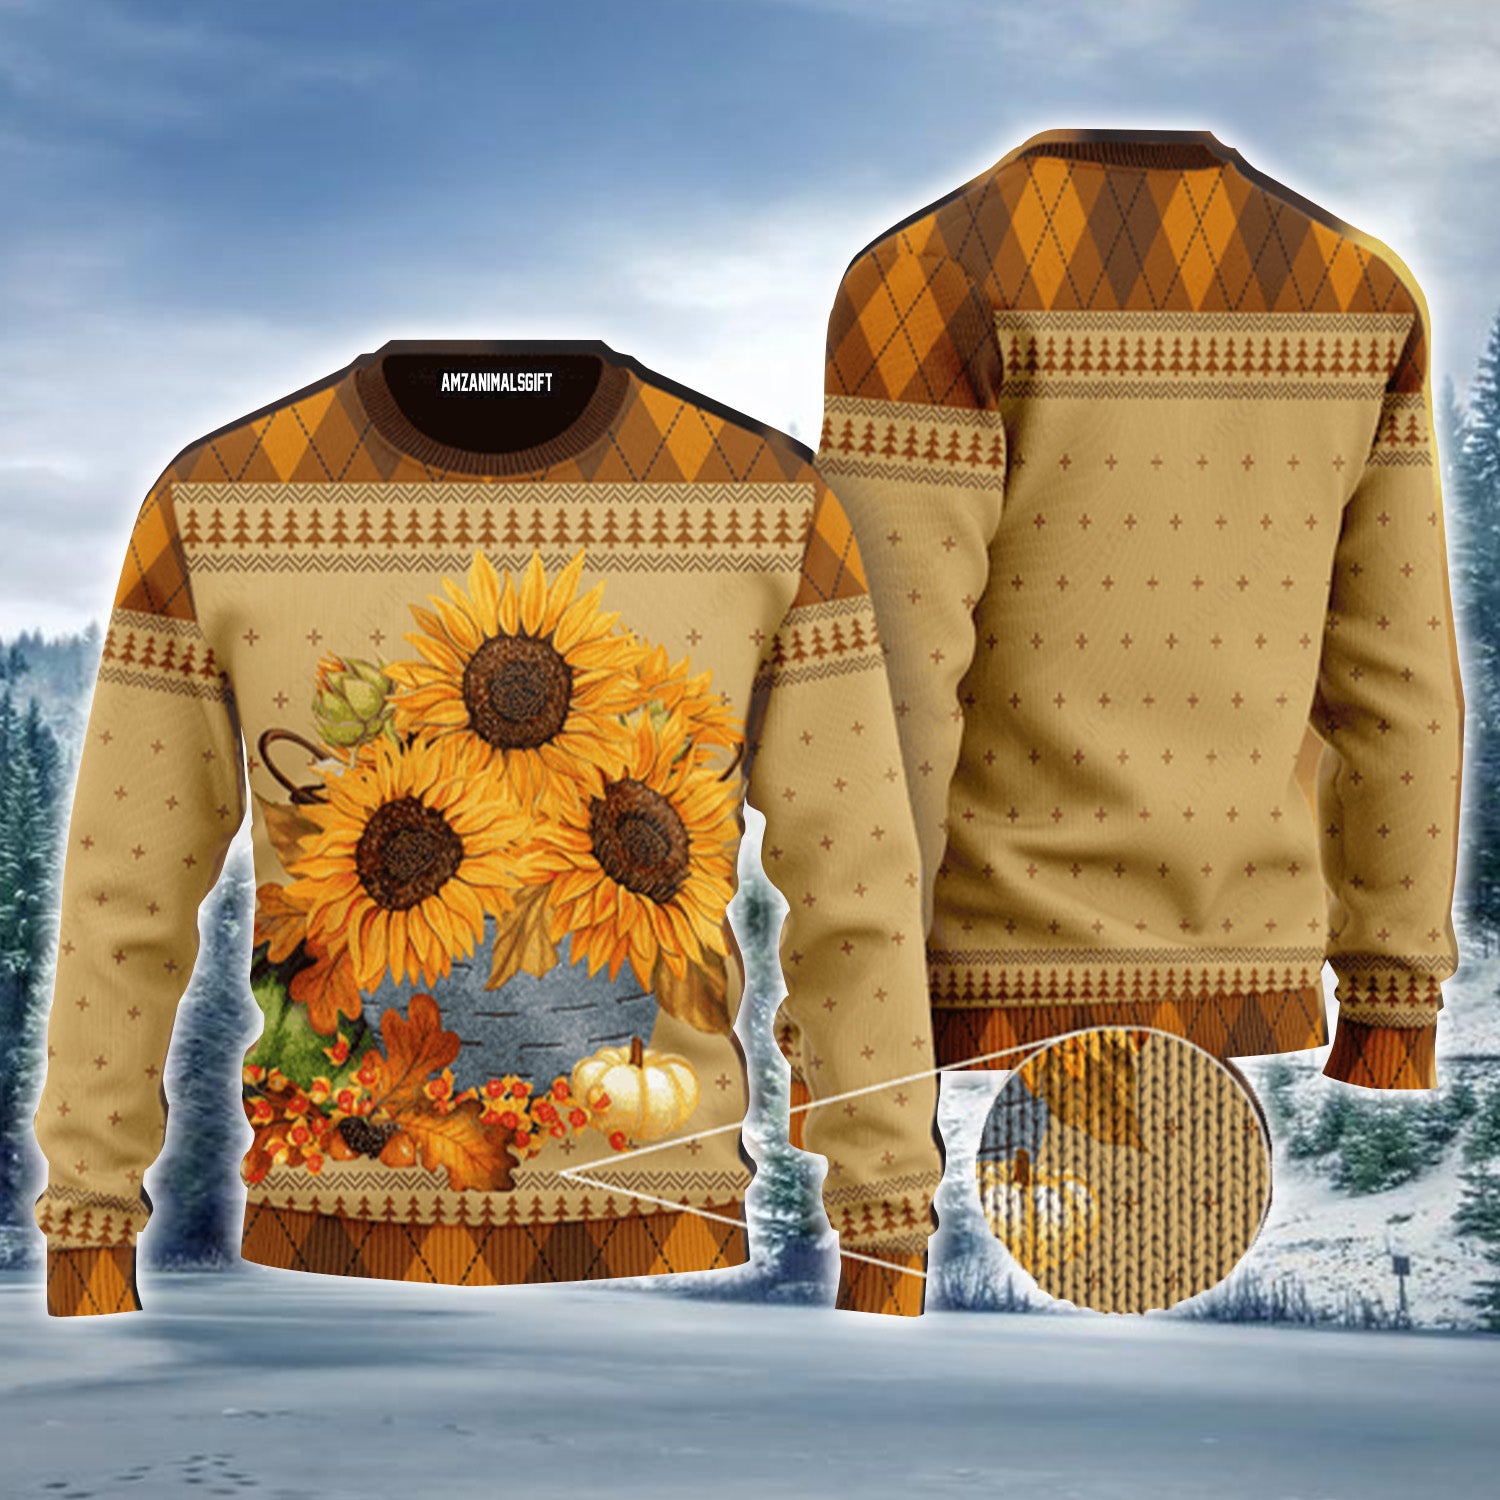 Fall Sunflower Pumpkin Urly Sweater, Christmas Sweater For Men & Women - Perfect Gift For New Year, Winter, Christmas, Thanksgiving